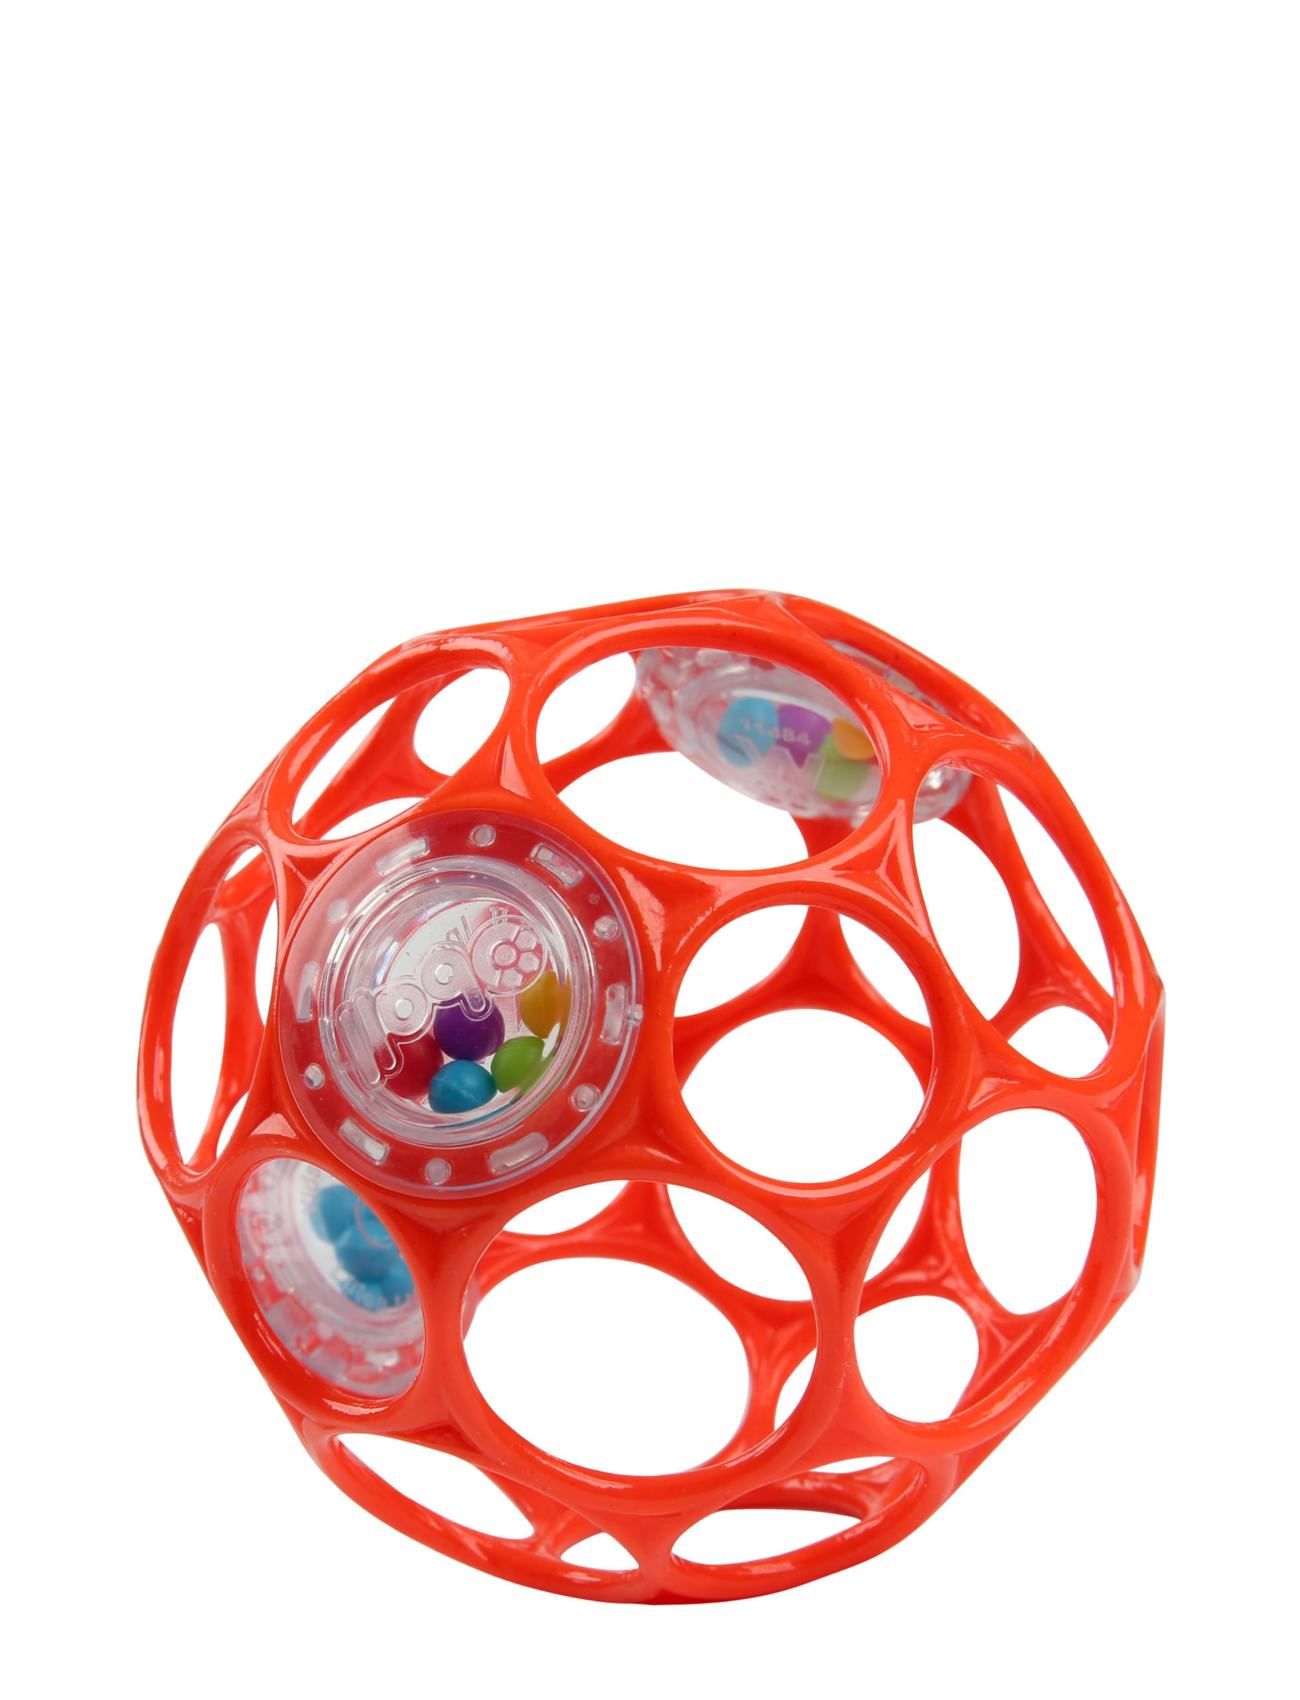 Oball Rattle - Rød Toys Baby Toys Educational Toys Activity Toys Red Oball